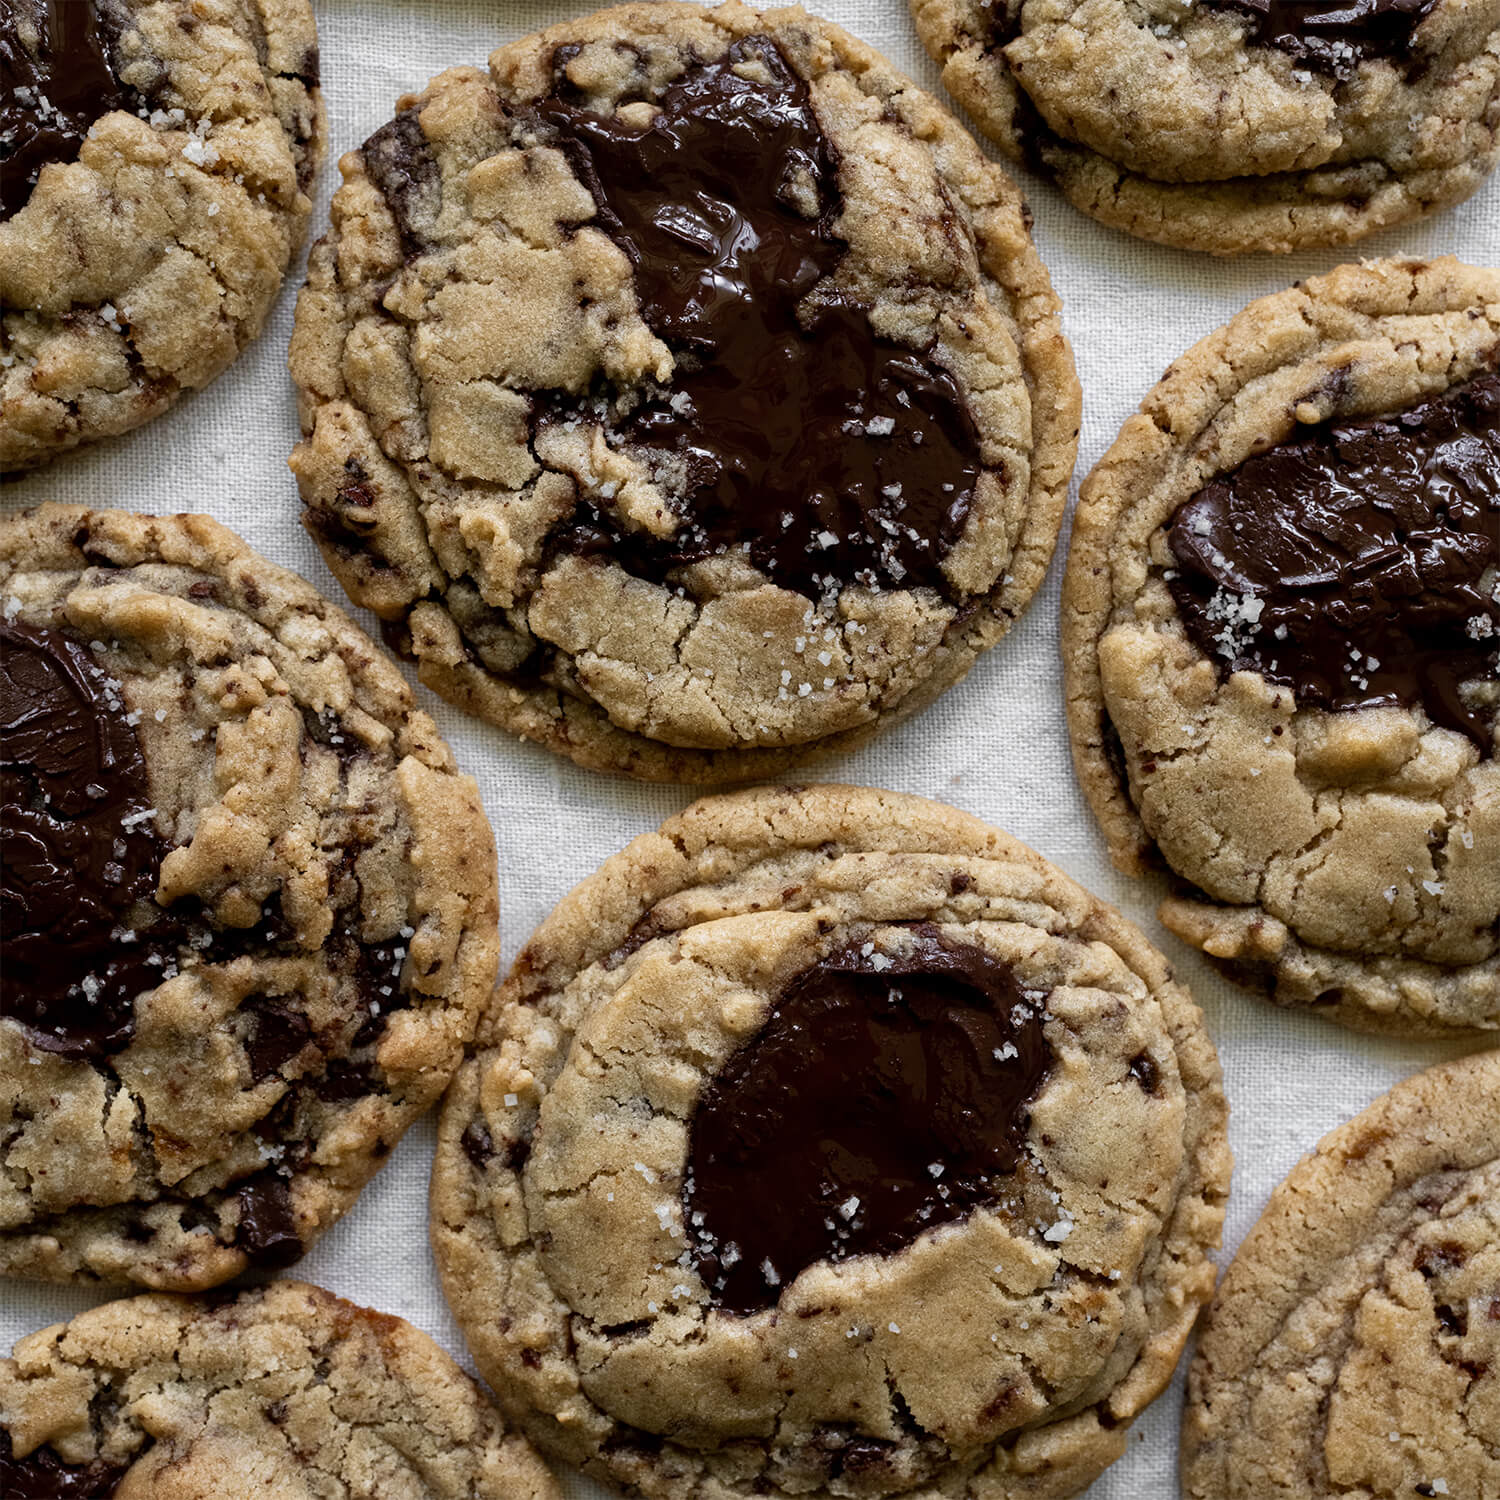 Caramelized chocolate cookies